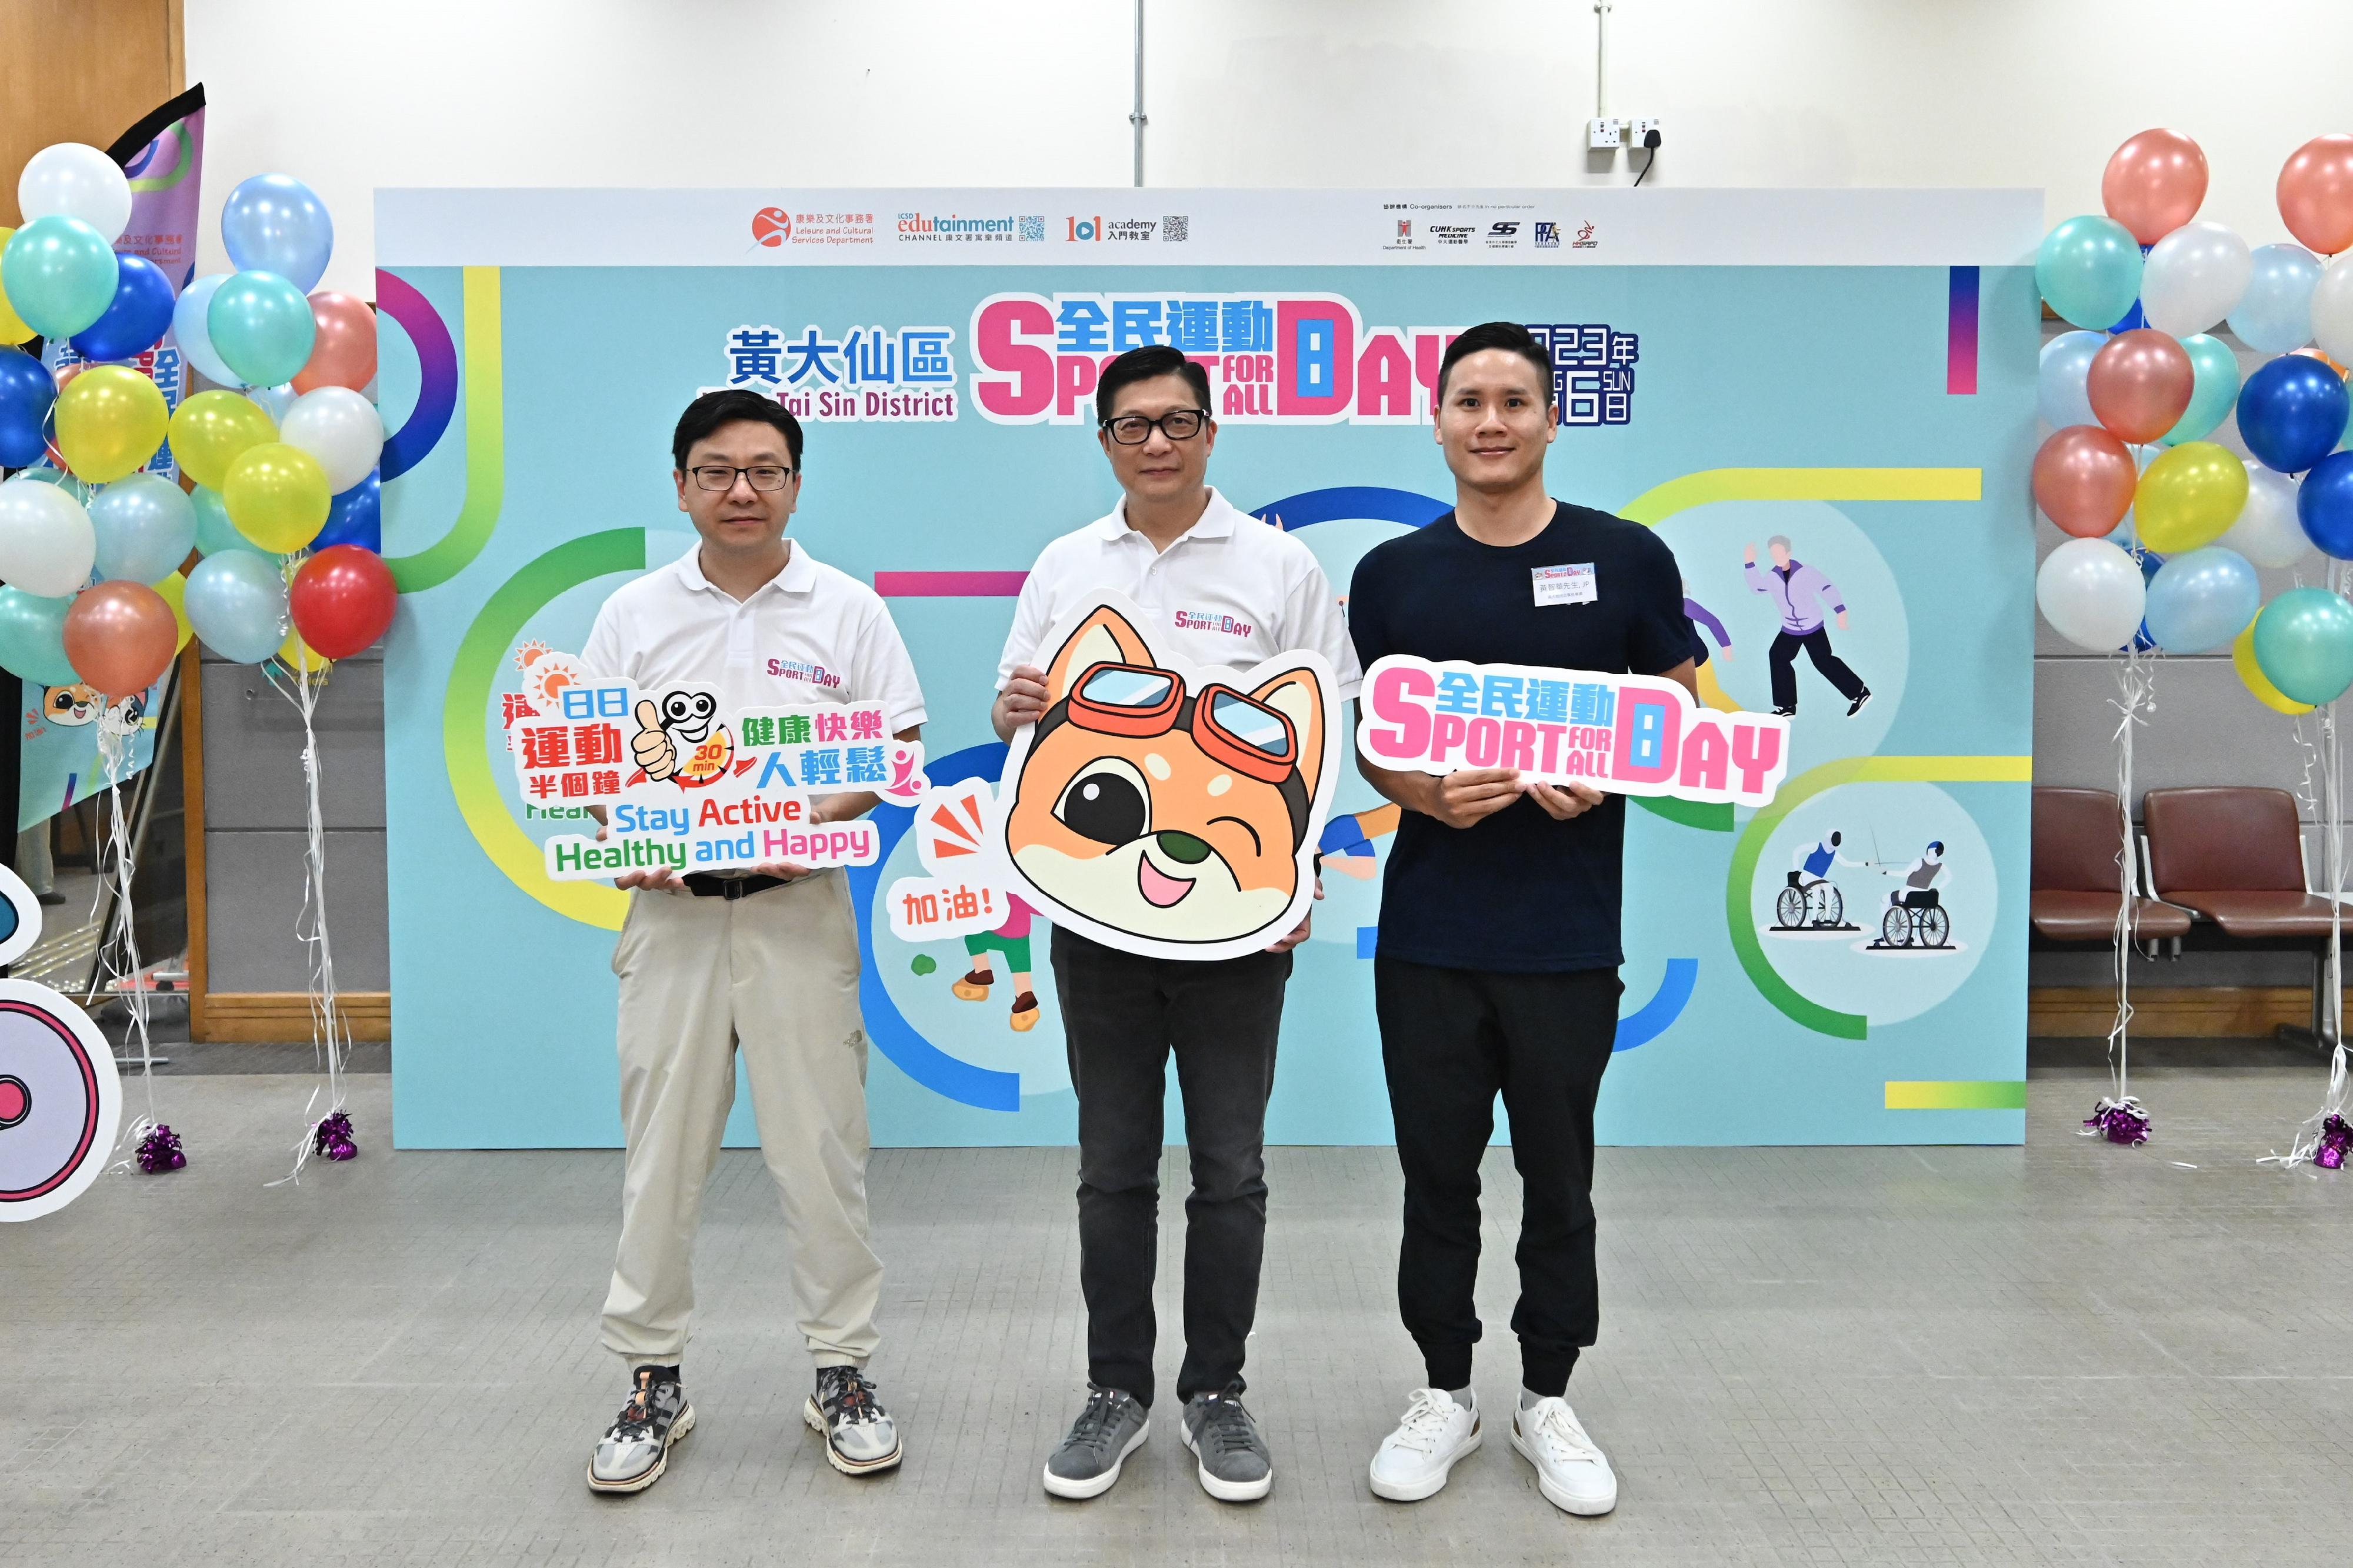 The Secretary for Security, Mr Tang Ping-keung, and the Secretary for Labour and Welfare, Mr Chris Sun, joined the public for sports and recreation programmes at Po Kong Village Road Sports Centre this afternoon (August 6) as part of the Sport For All Day 2023 organised by the Leisure and Cultural Services Department. Photo shows (from right to left) the District Officer (Wong Tai Sin), Mr Steve Wong, Mr Tang, and Mr Sun.